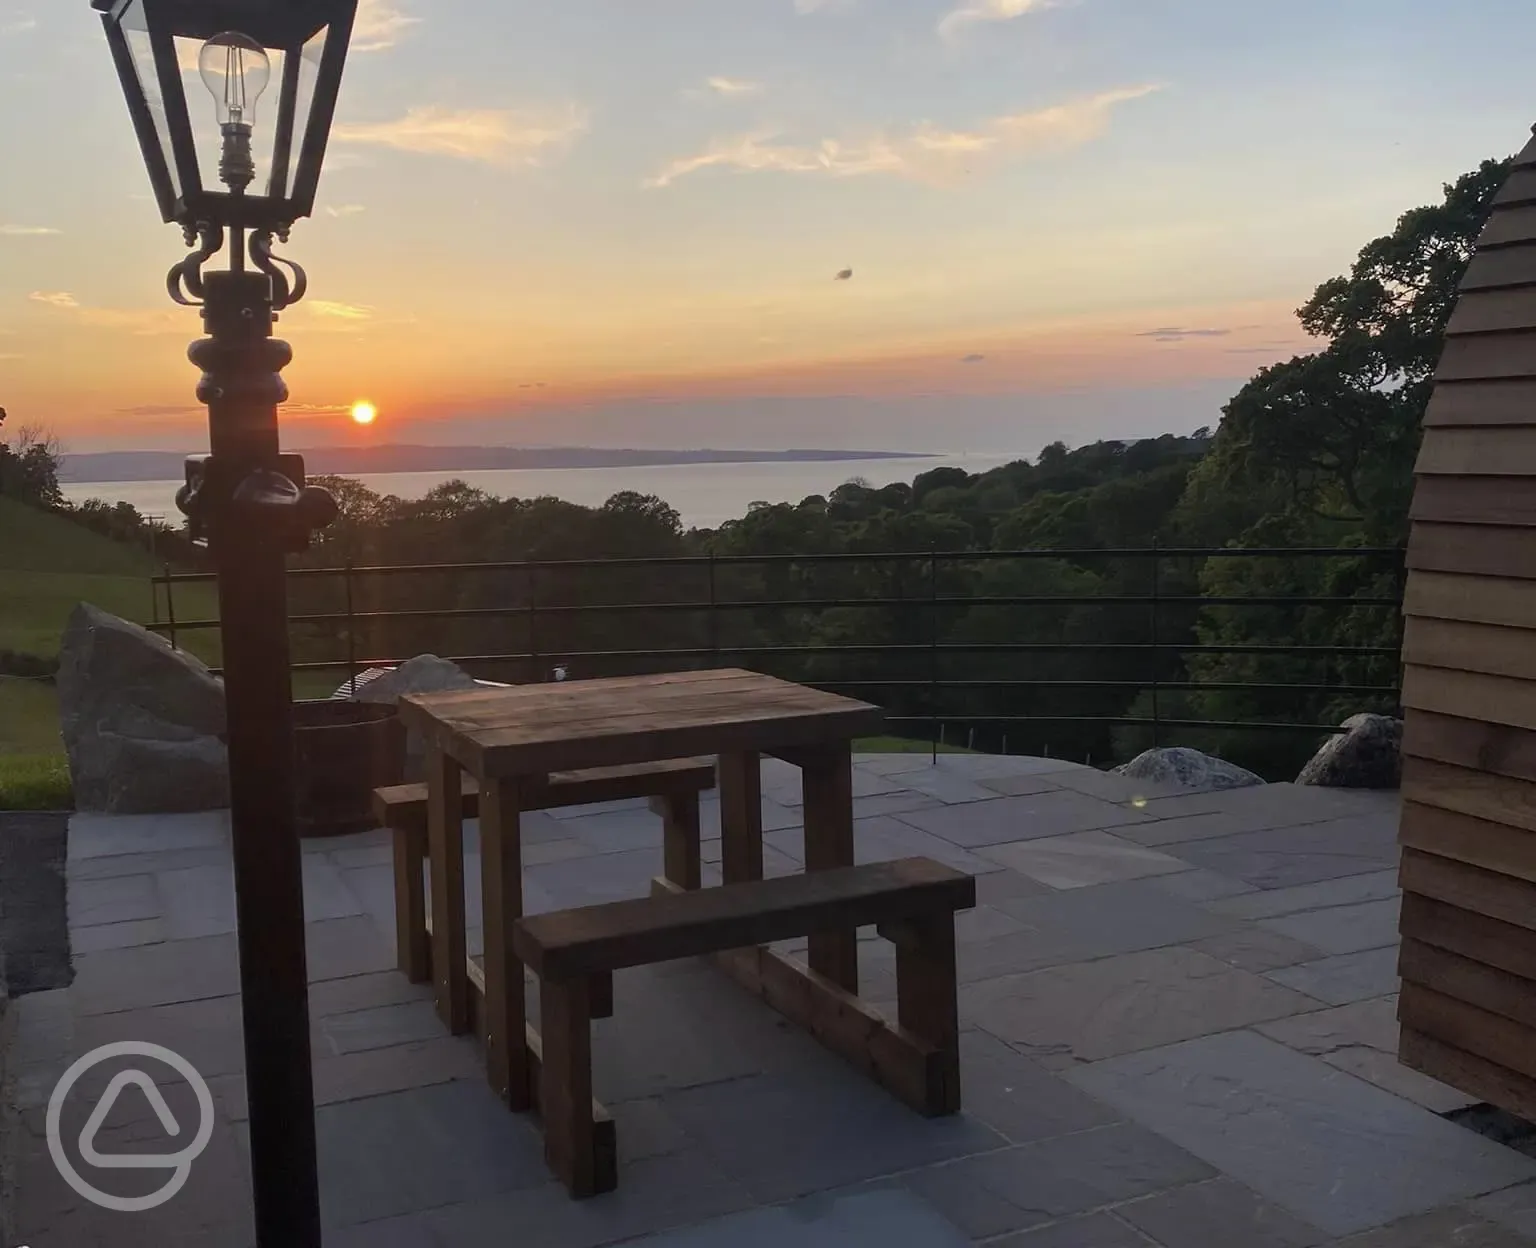 Sunset views from site